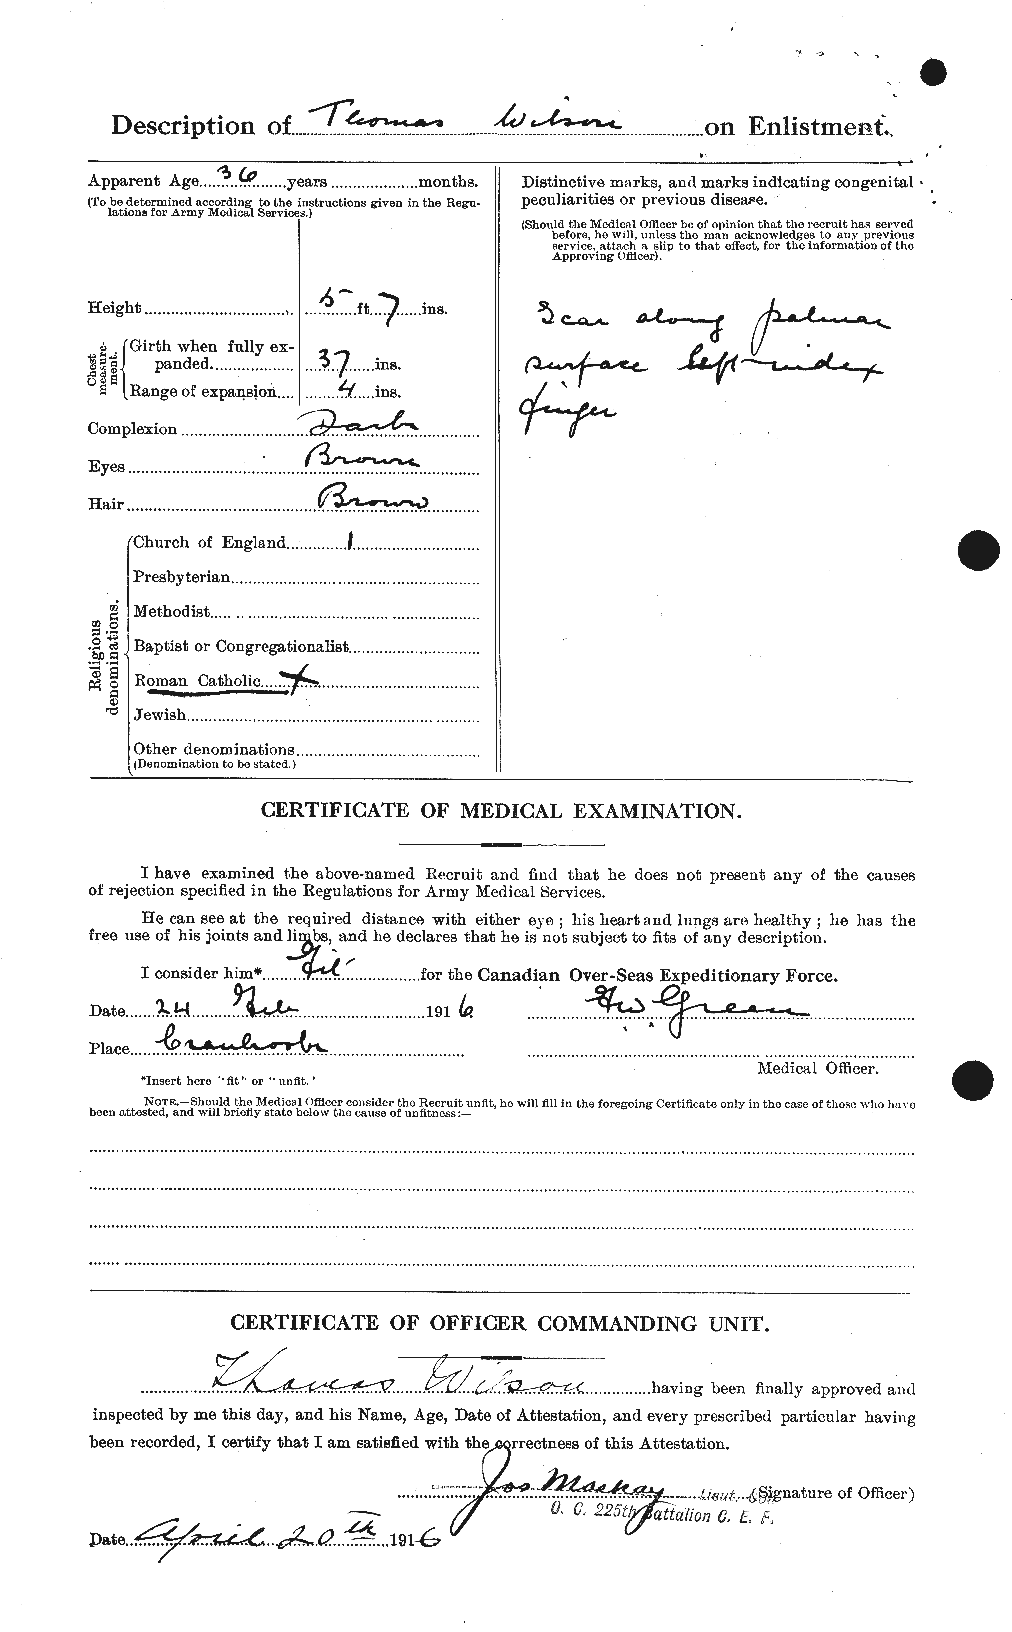 Personnel Records of the First World War - CEF 681222b